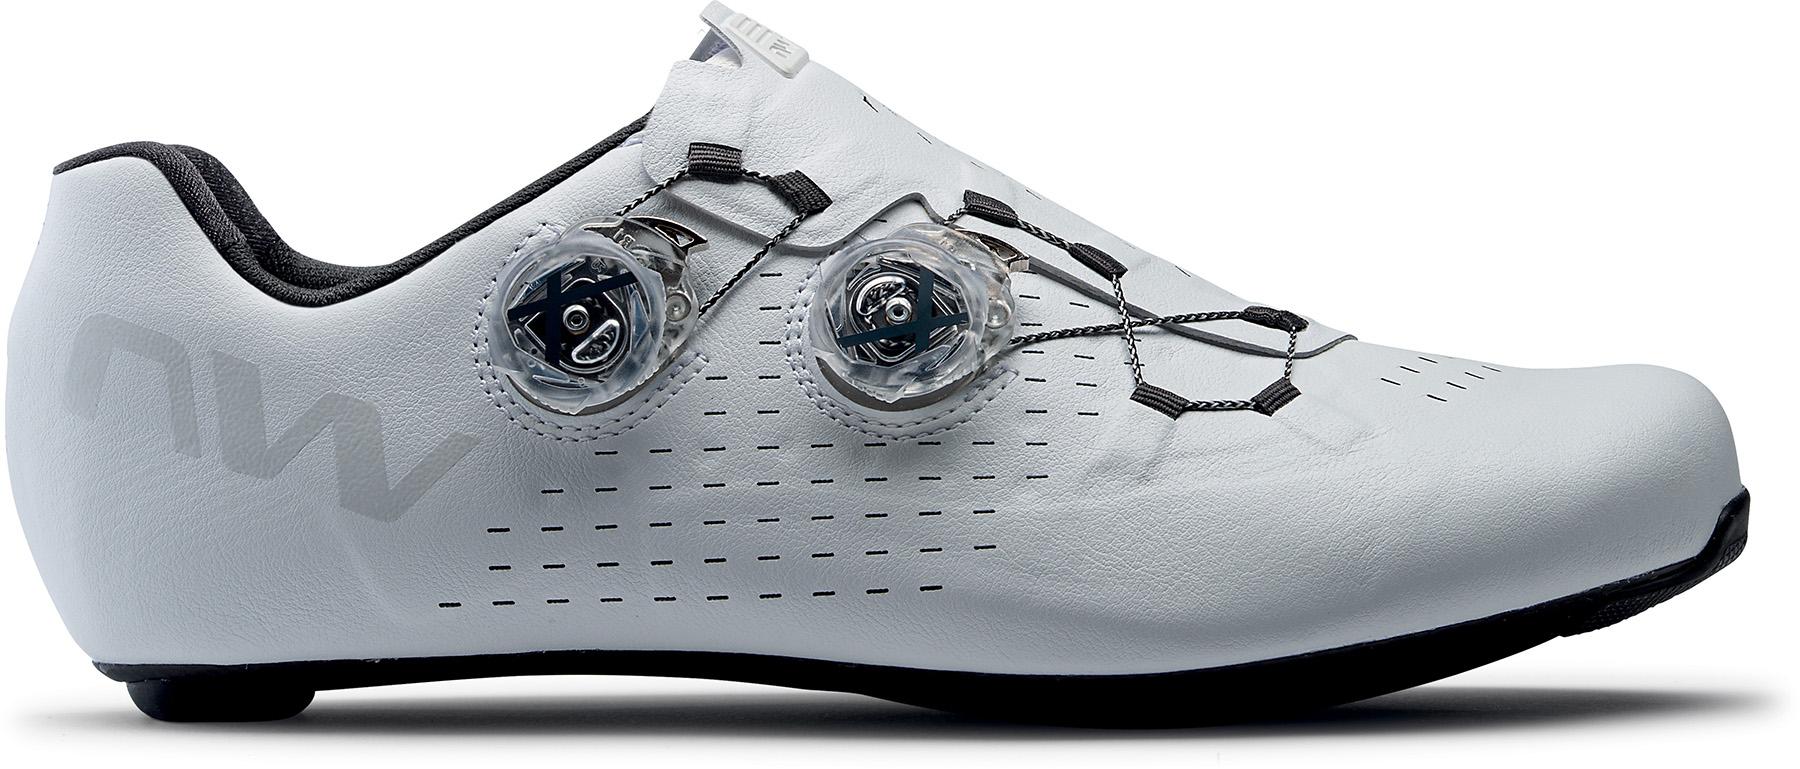 Northwave Extreme Pro 2 Road Shoes - White